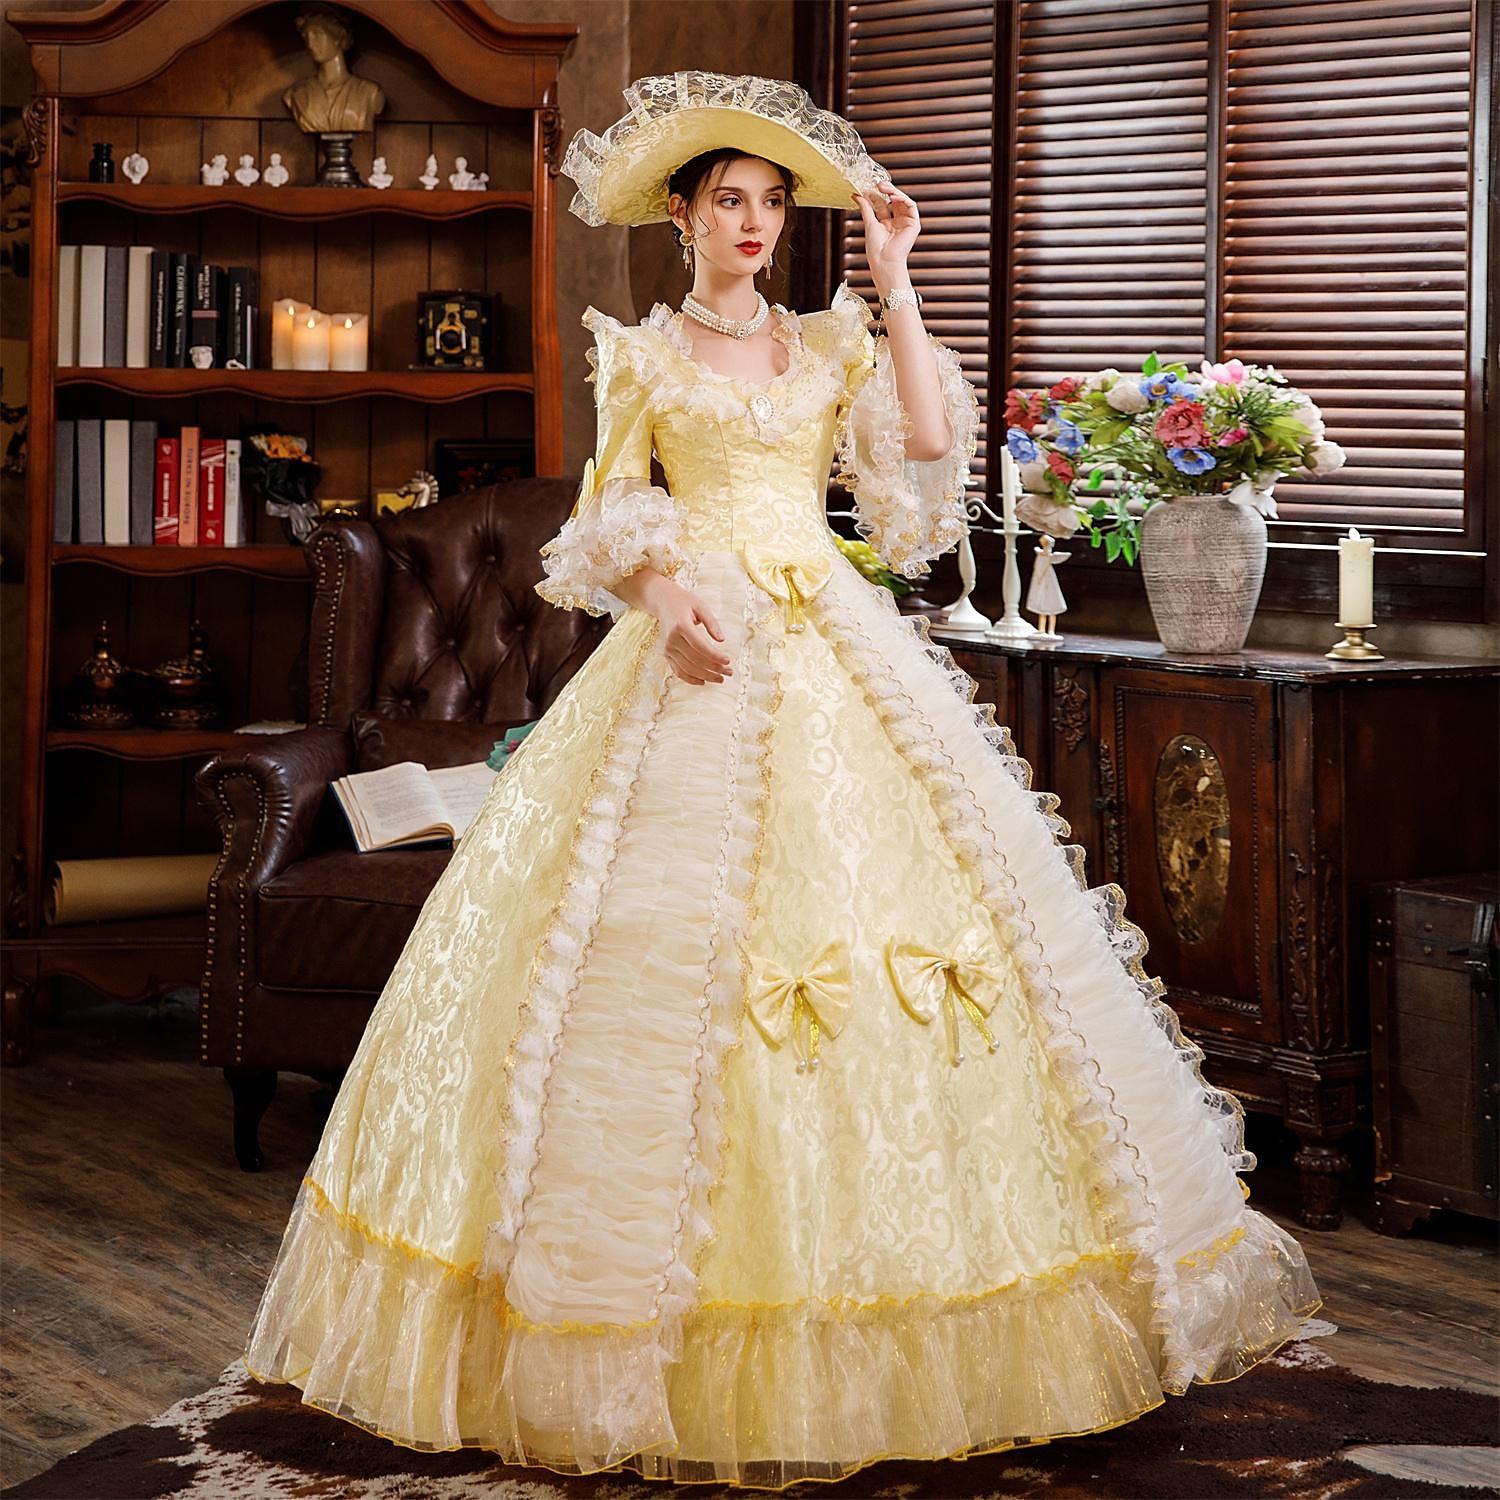 Lady Victorian Dress Costume Medieval Prom Ball Gown Gothic Retro